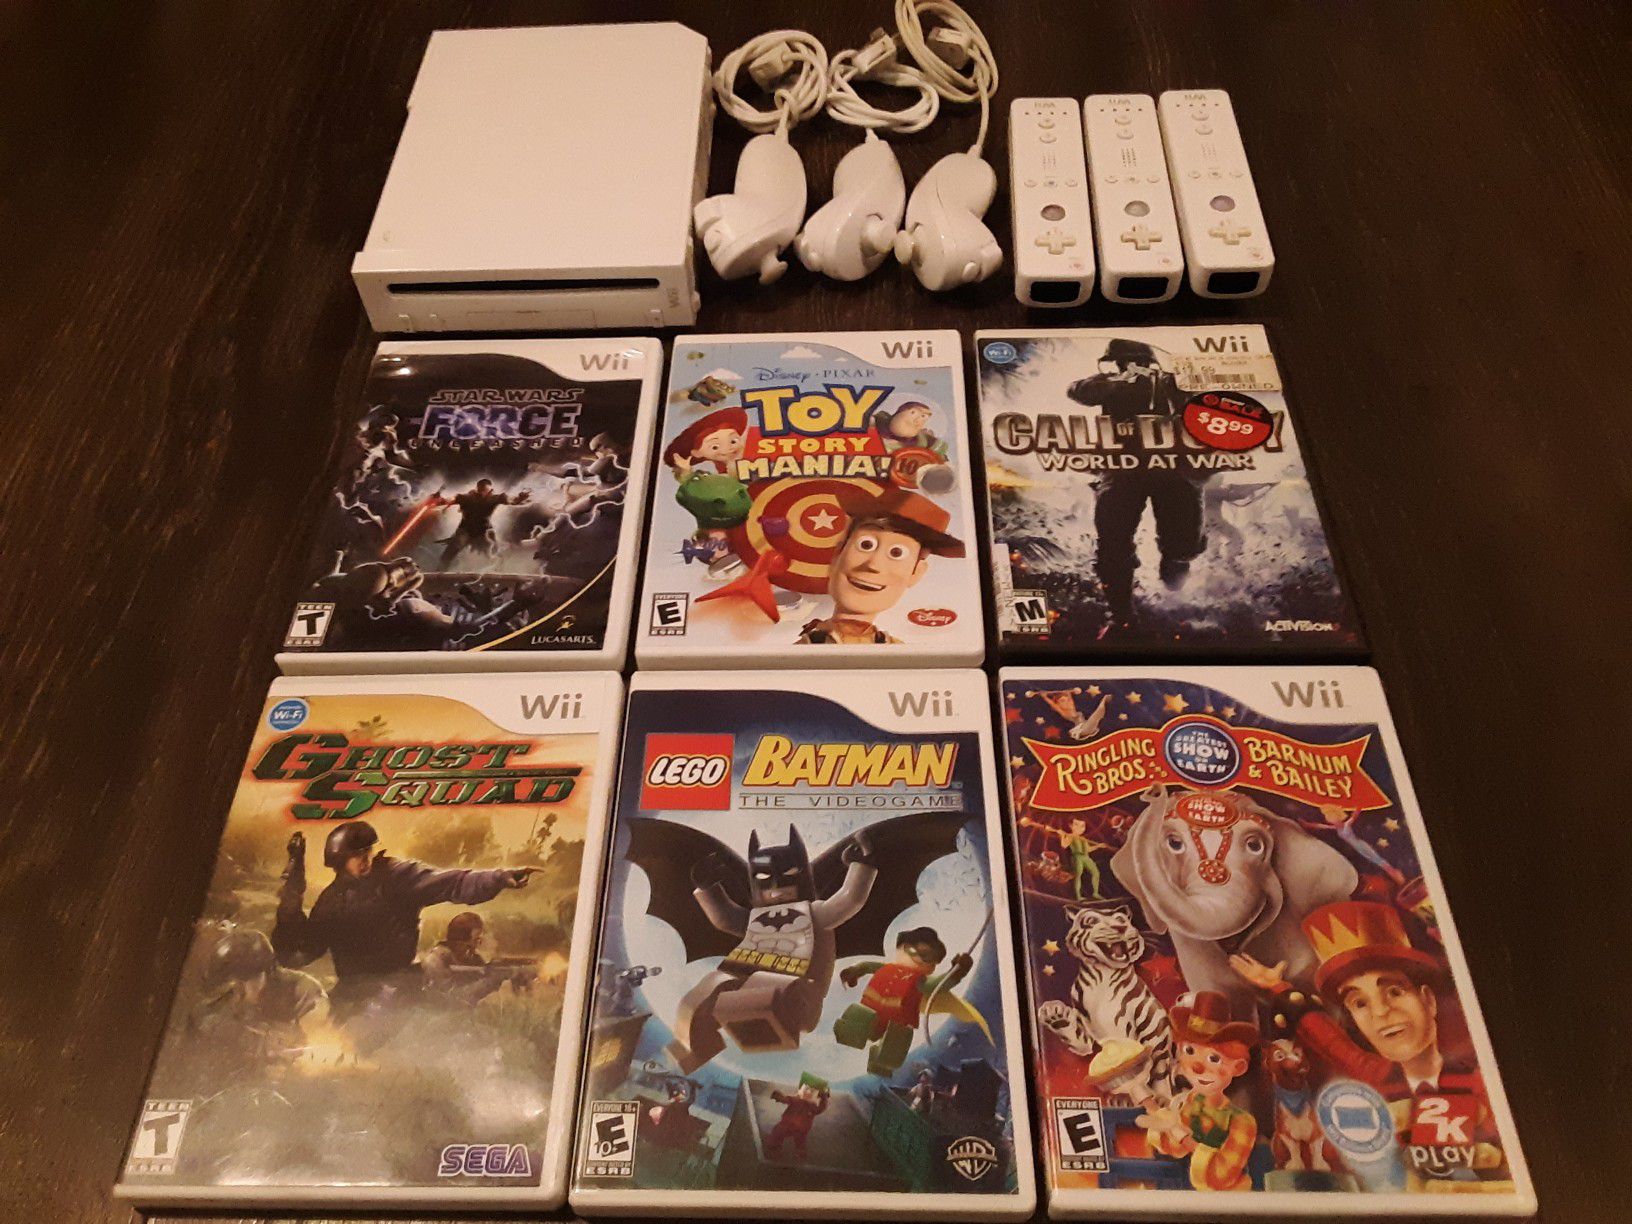 NINTENDO Wii works for $50dlrs